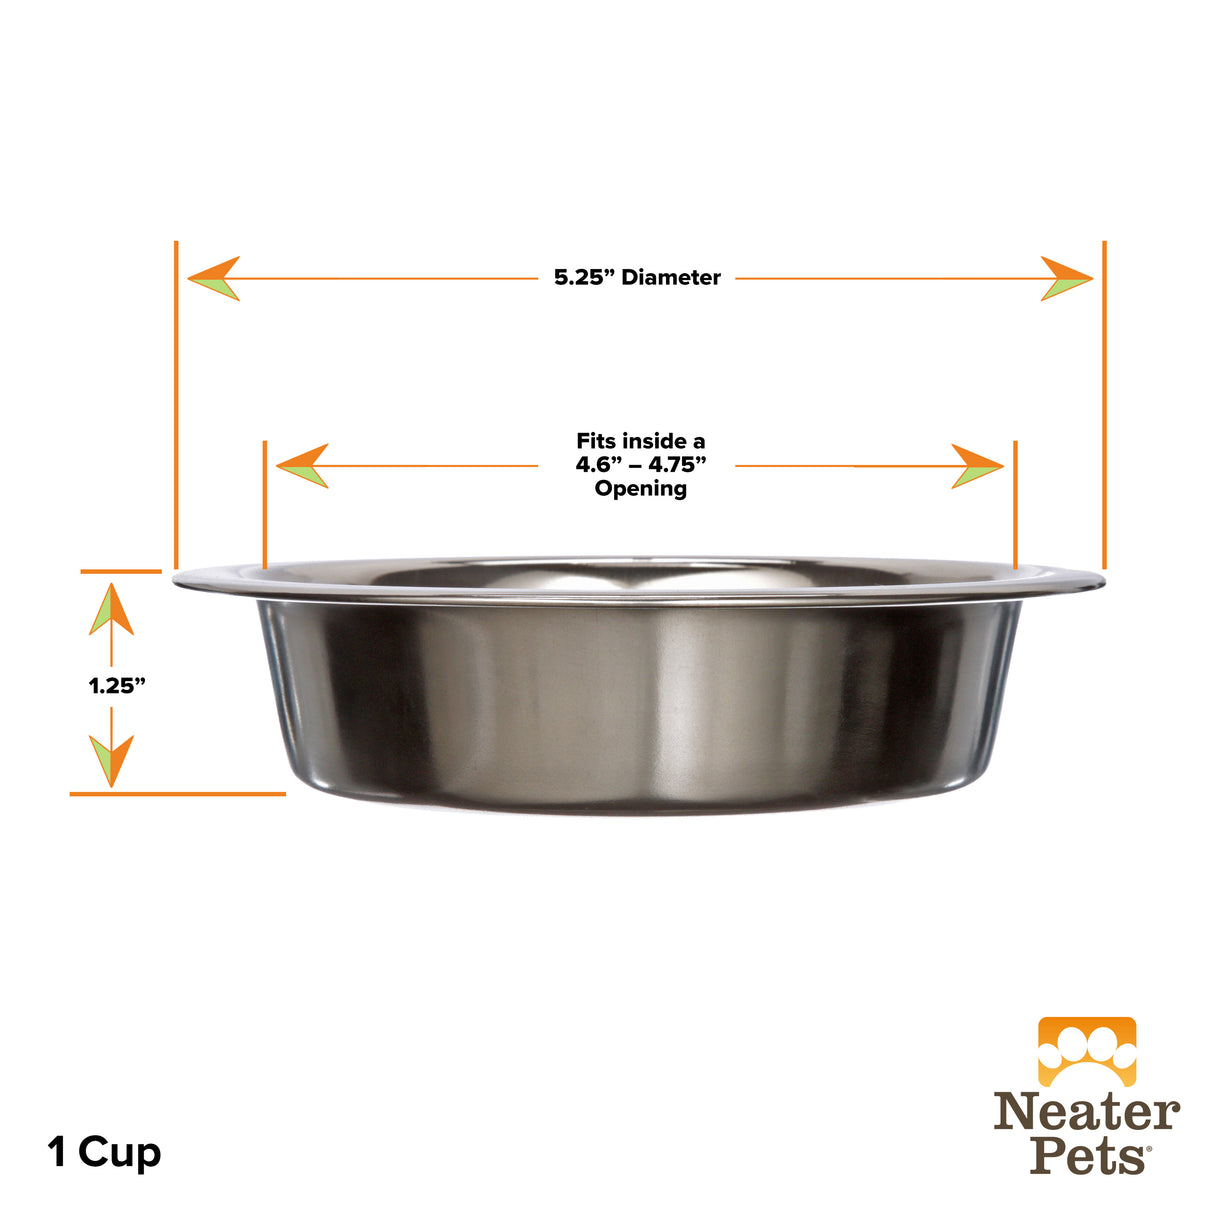 1 cup Stainless Steel Replacement Bowls for Neater Feeder dimensions